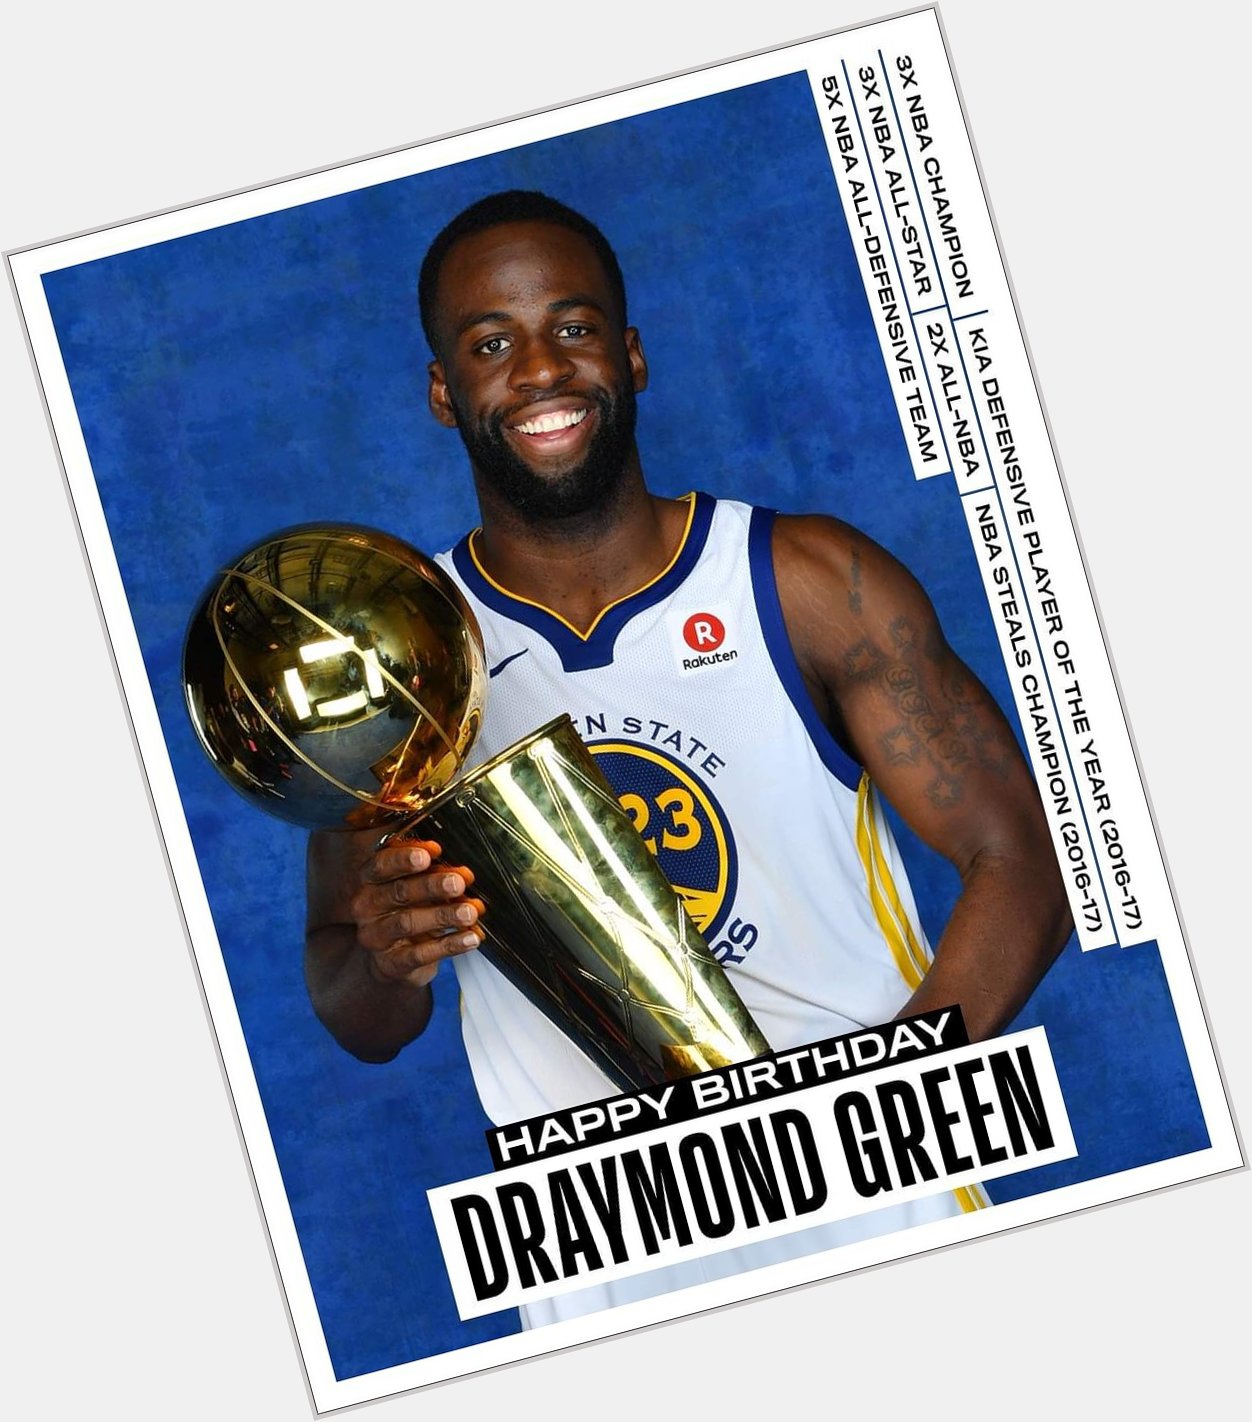 Join us in wishing Draymond Green of the Golden State Warriors a HAPPY 30TH BIRTHDAY!  